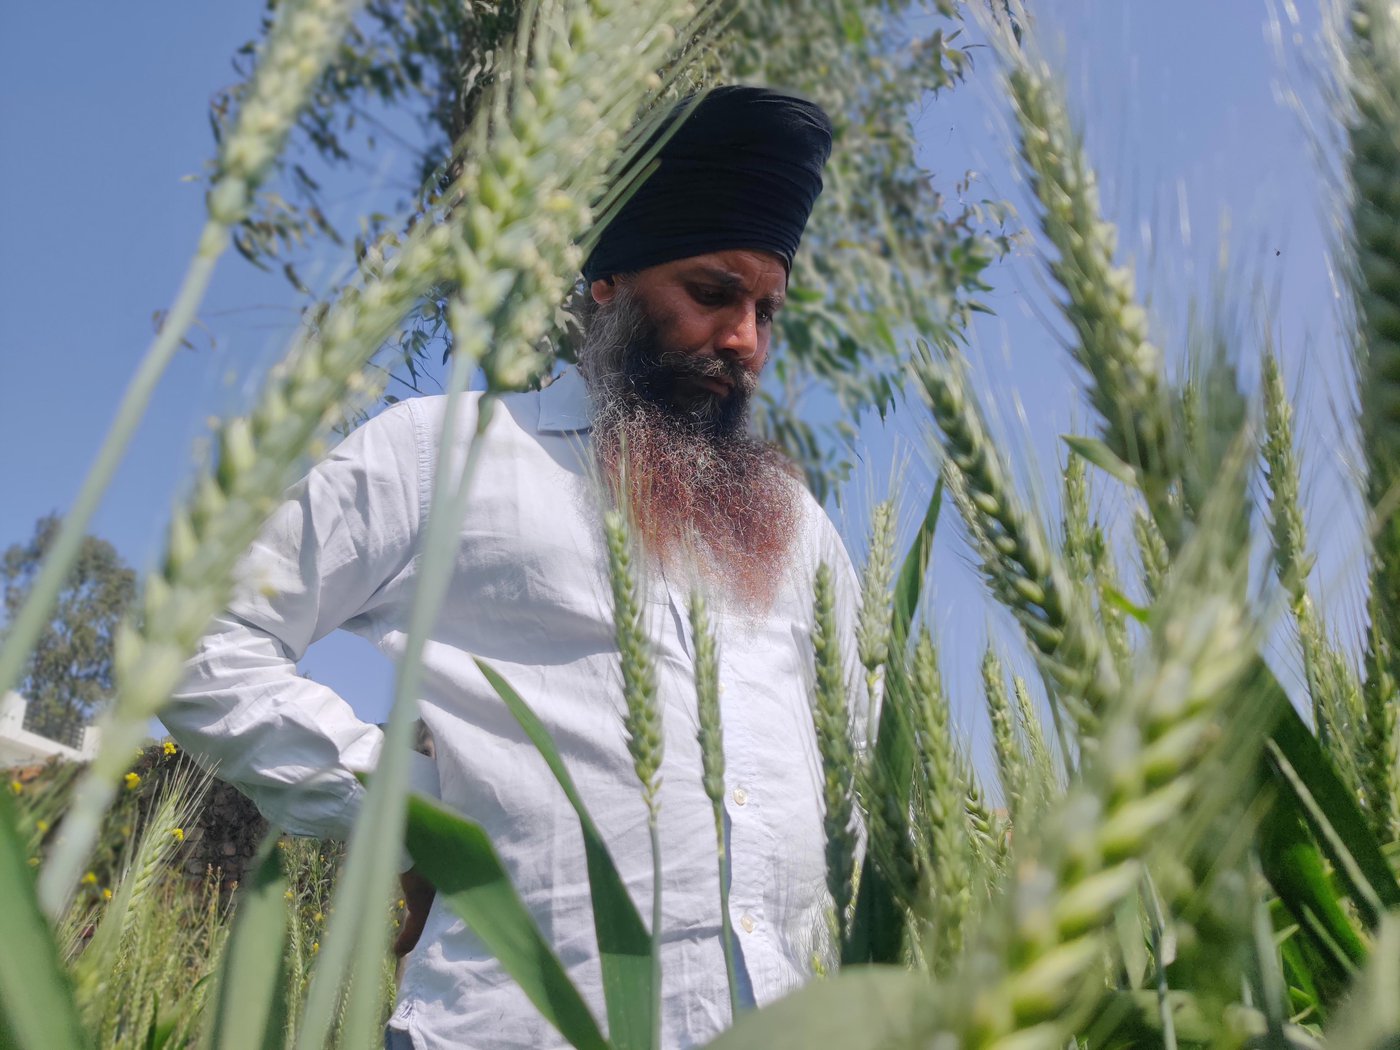 Sukhdeo Chanchal Singh in his farm